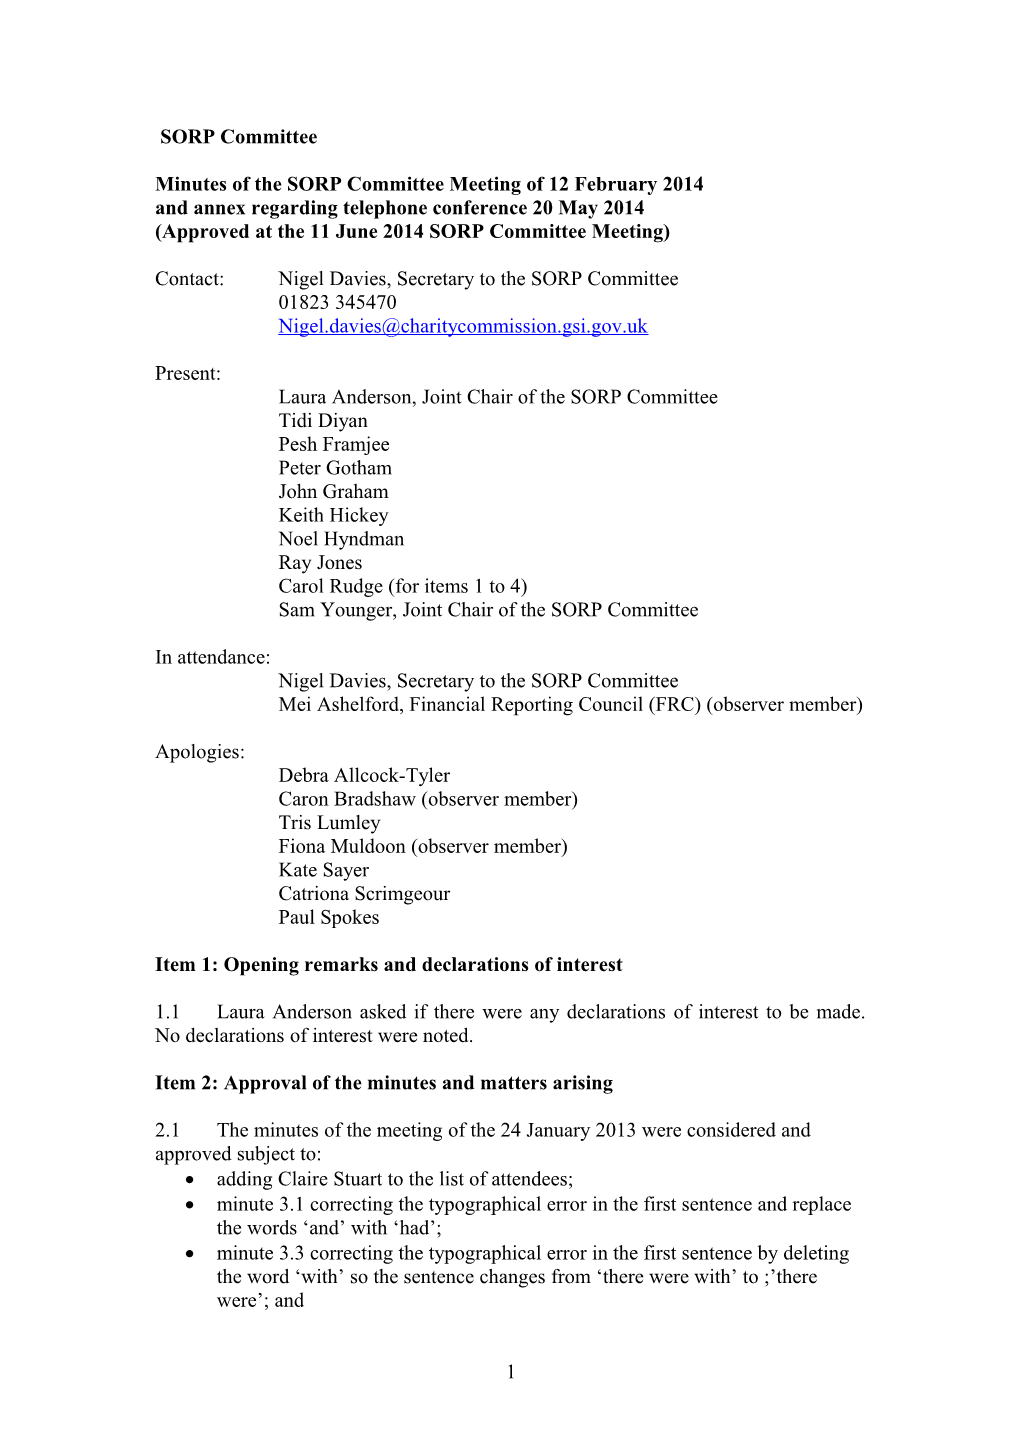 Minutes of the SORP Committee Meeting Of12 February 2014